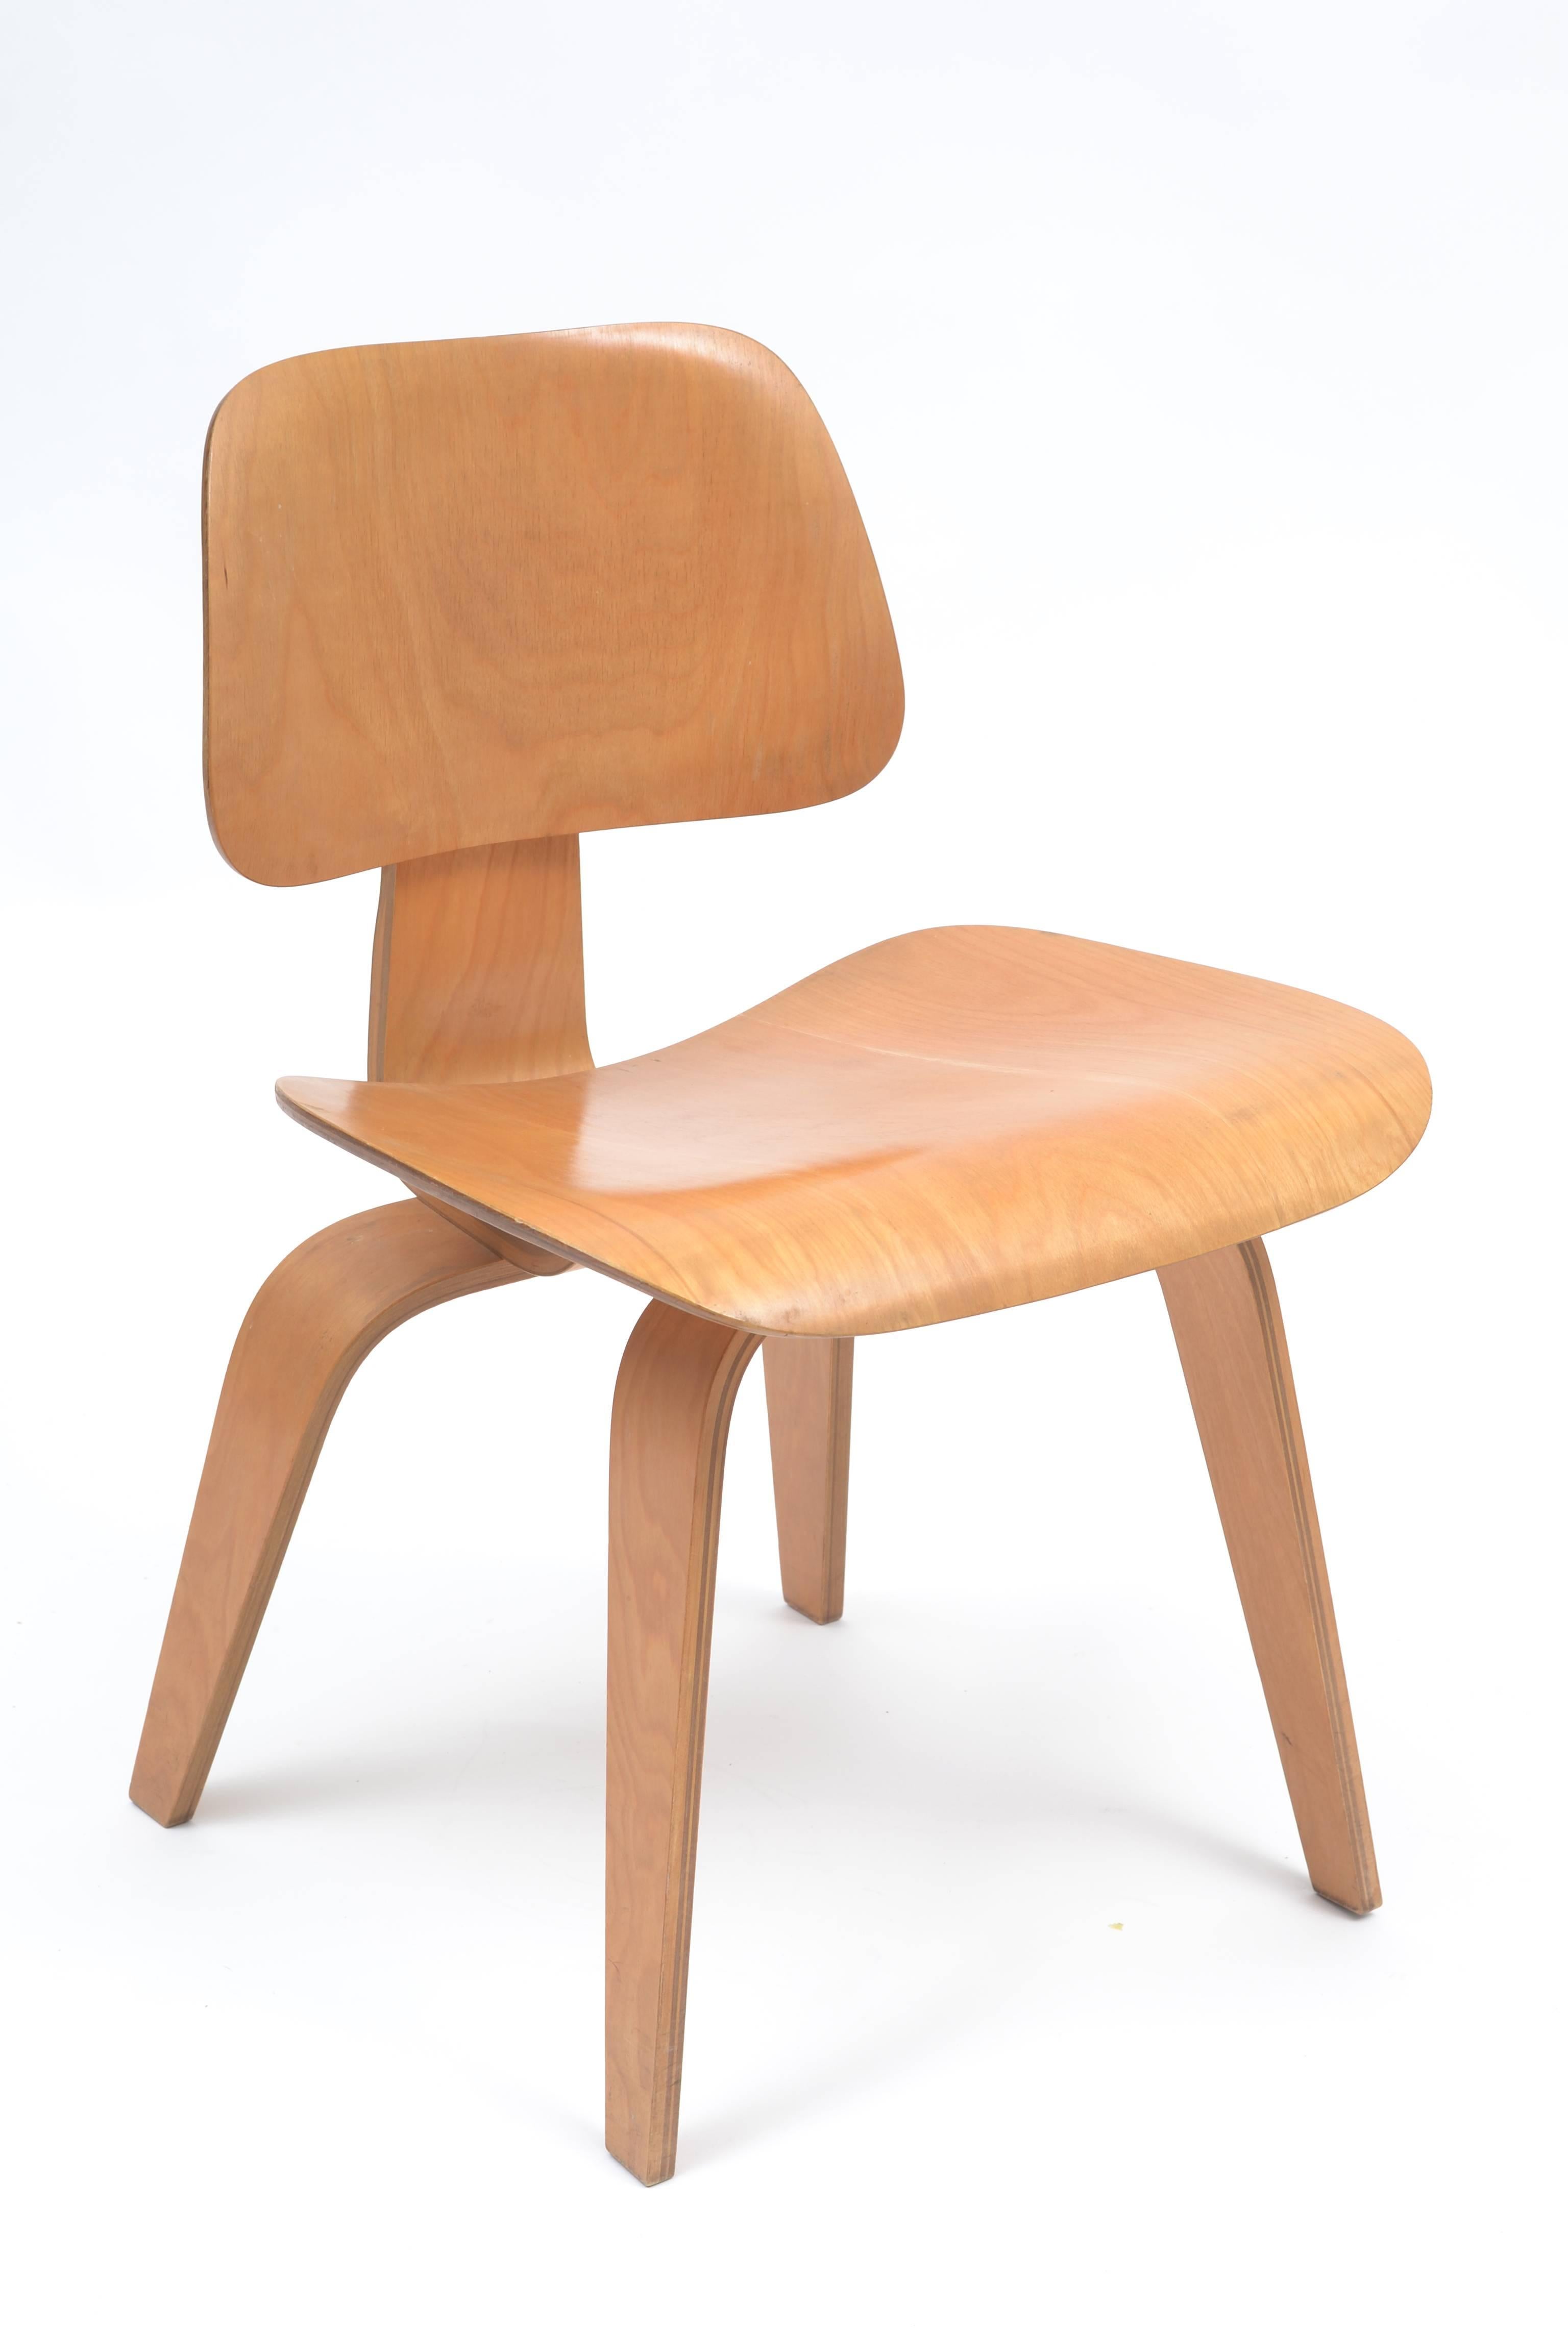 A stunning, all original set of well preserved Eames designed DCW chairs produced in the 1940s by Evans Products Company and distributed by Herman Miller. This birchwood set has minimal wear considering the age. The four chairs have no chips to the